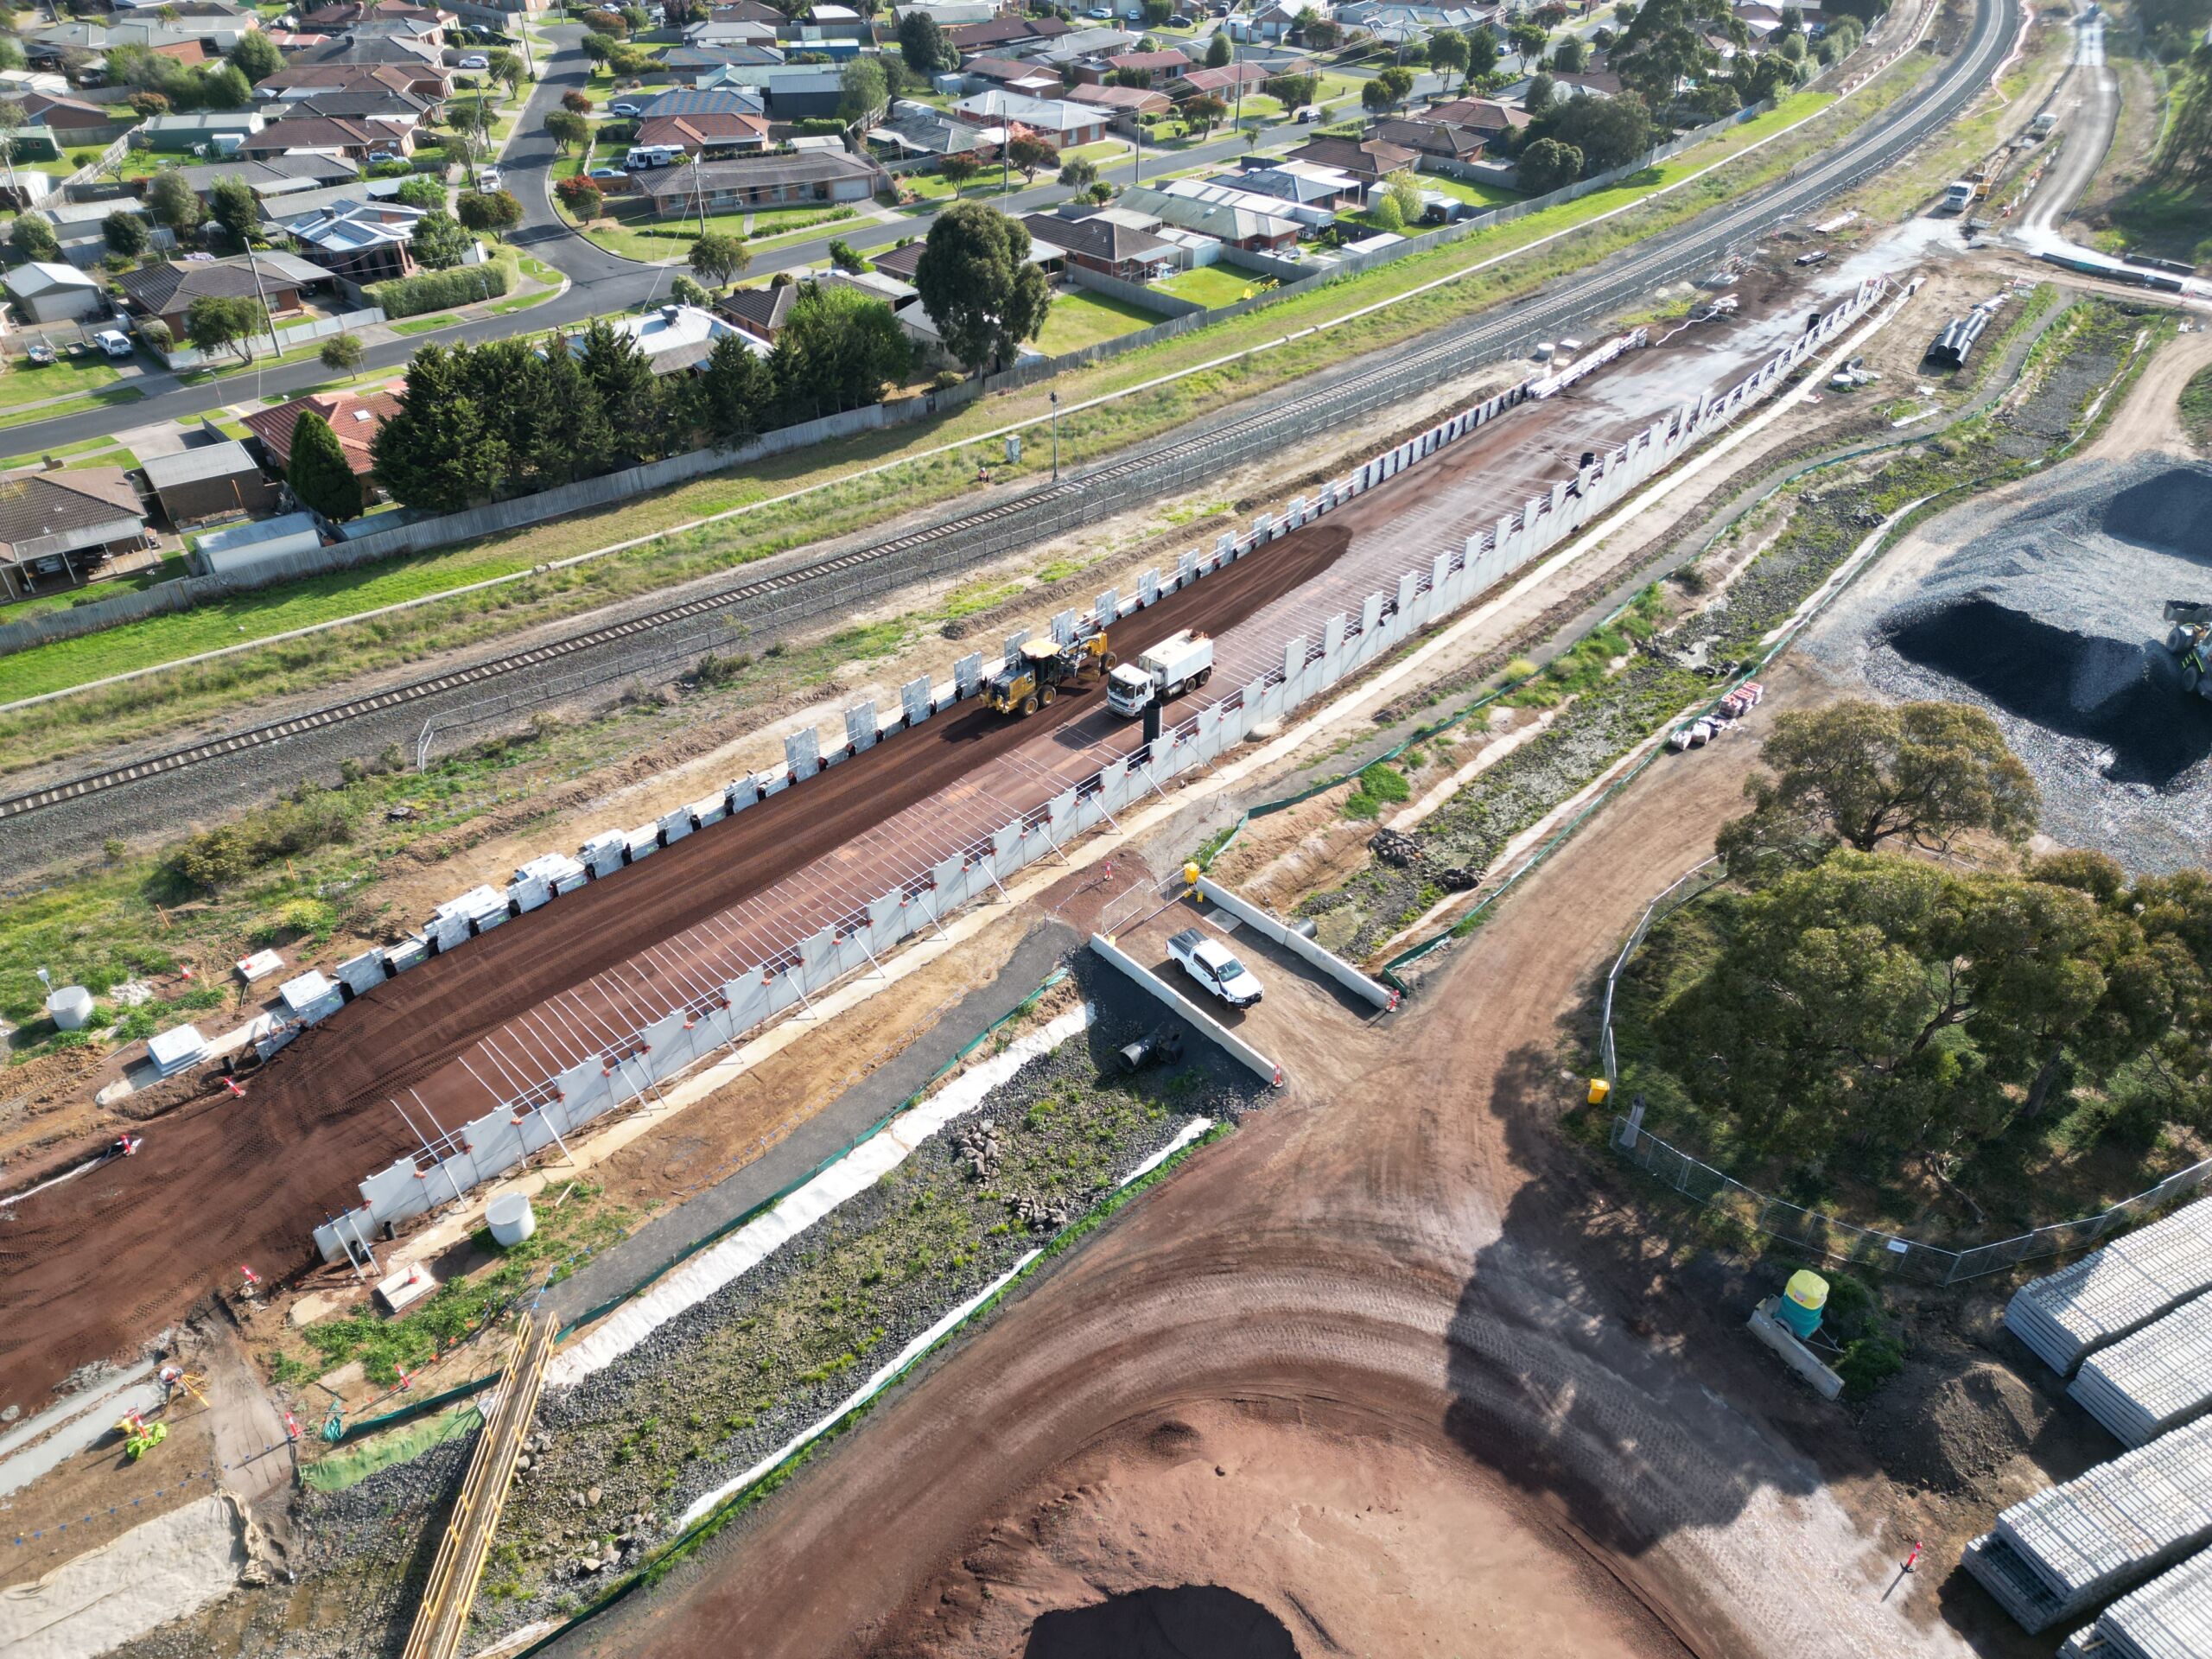 Aerial view of new construction works completed for the South Geelong to Waurn Ponds Duplication Rail Project